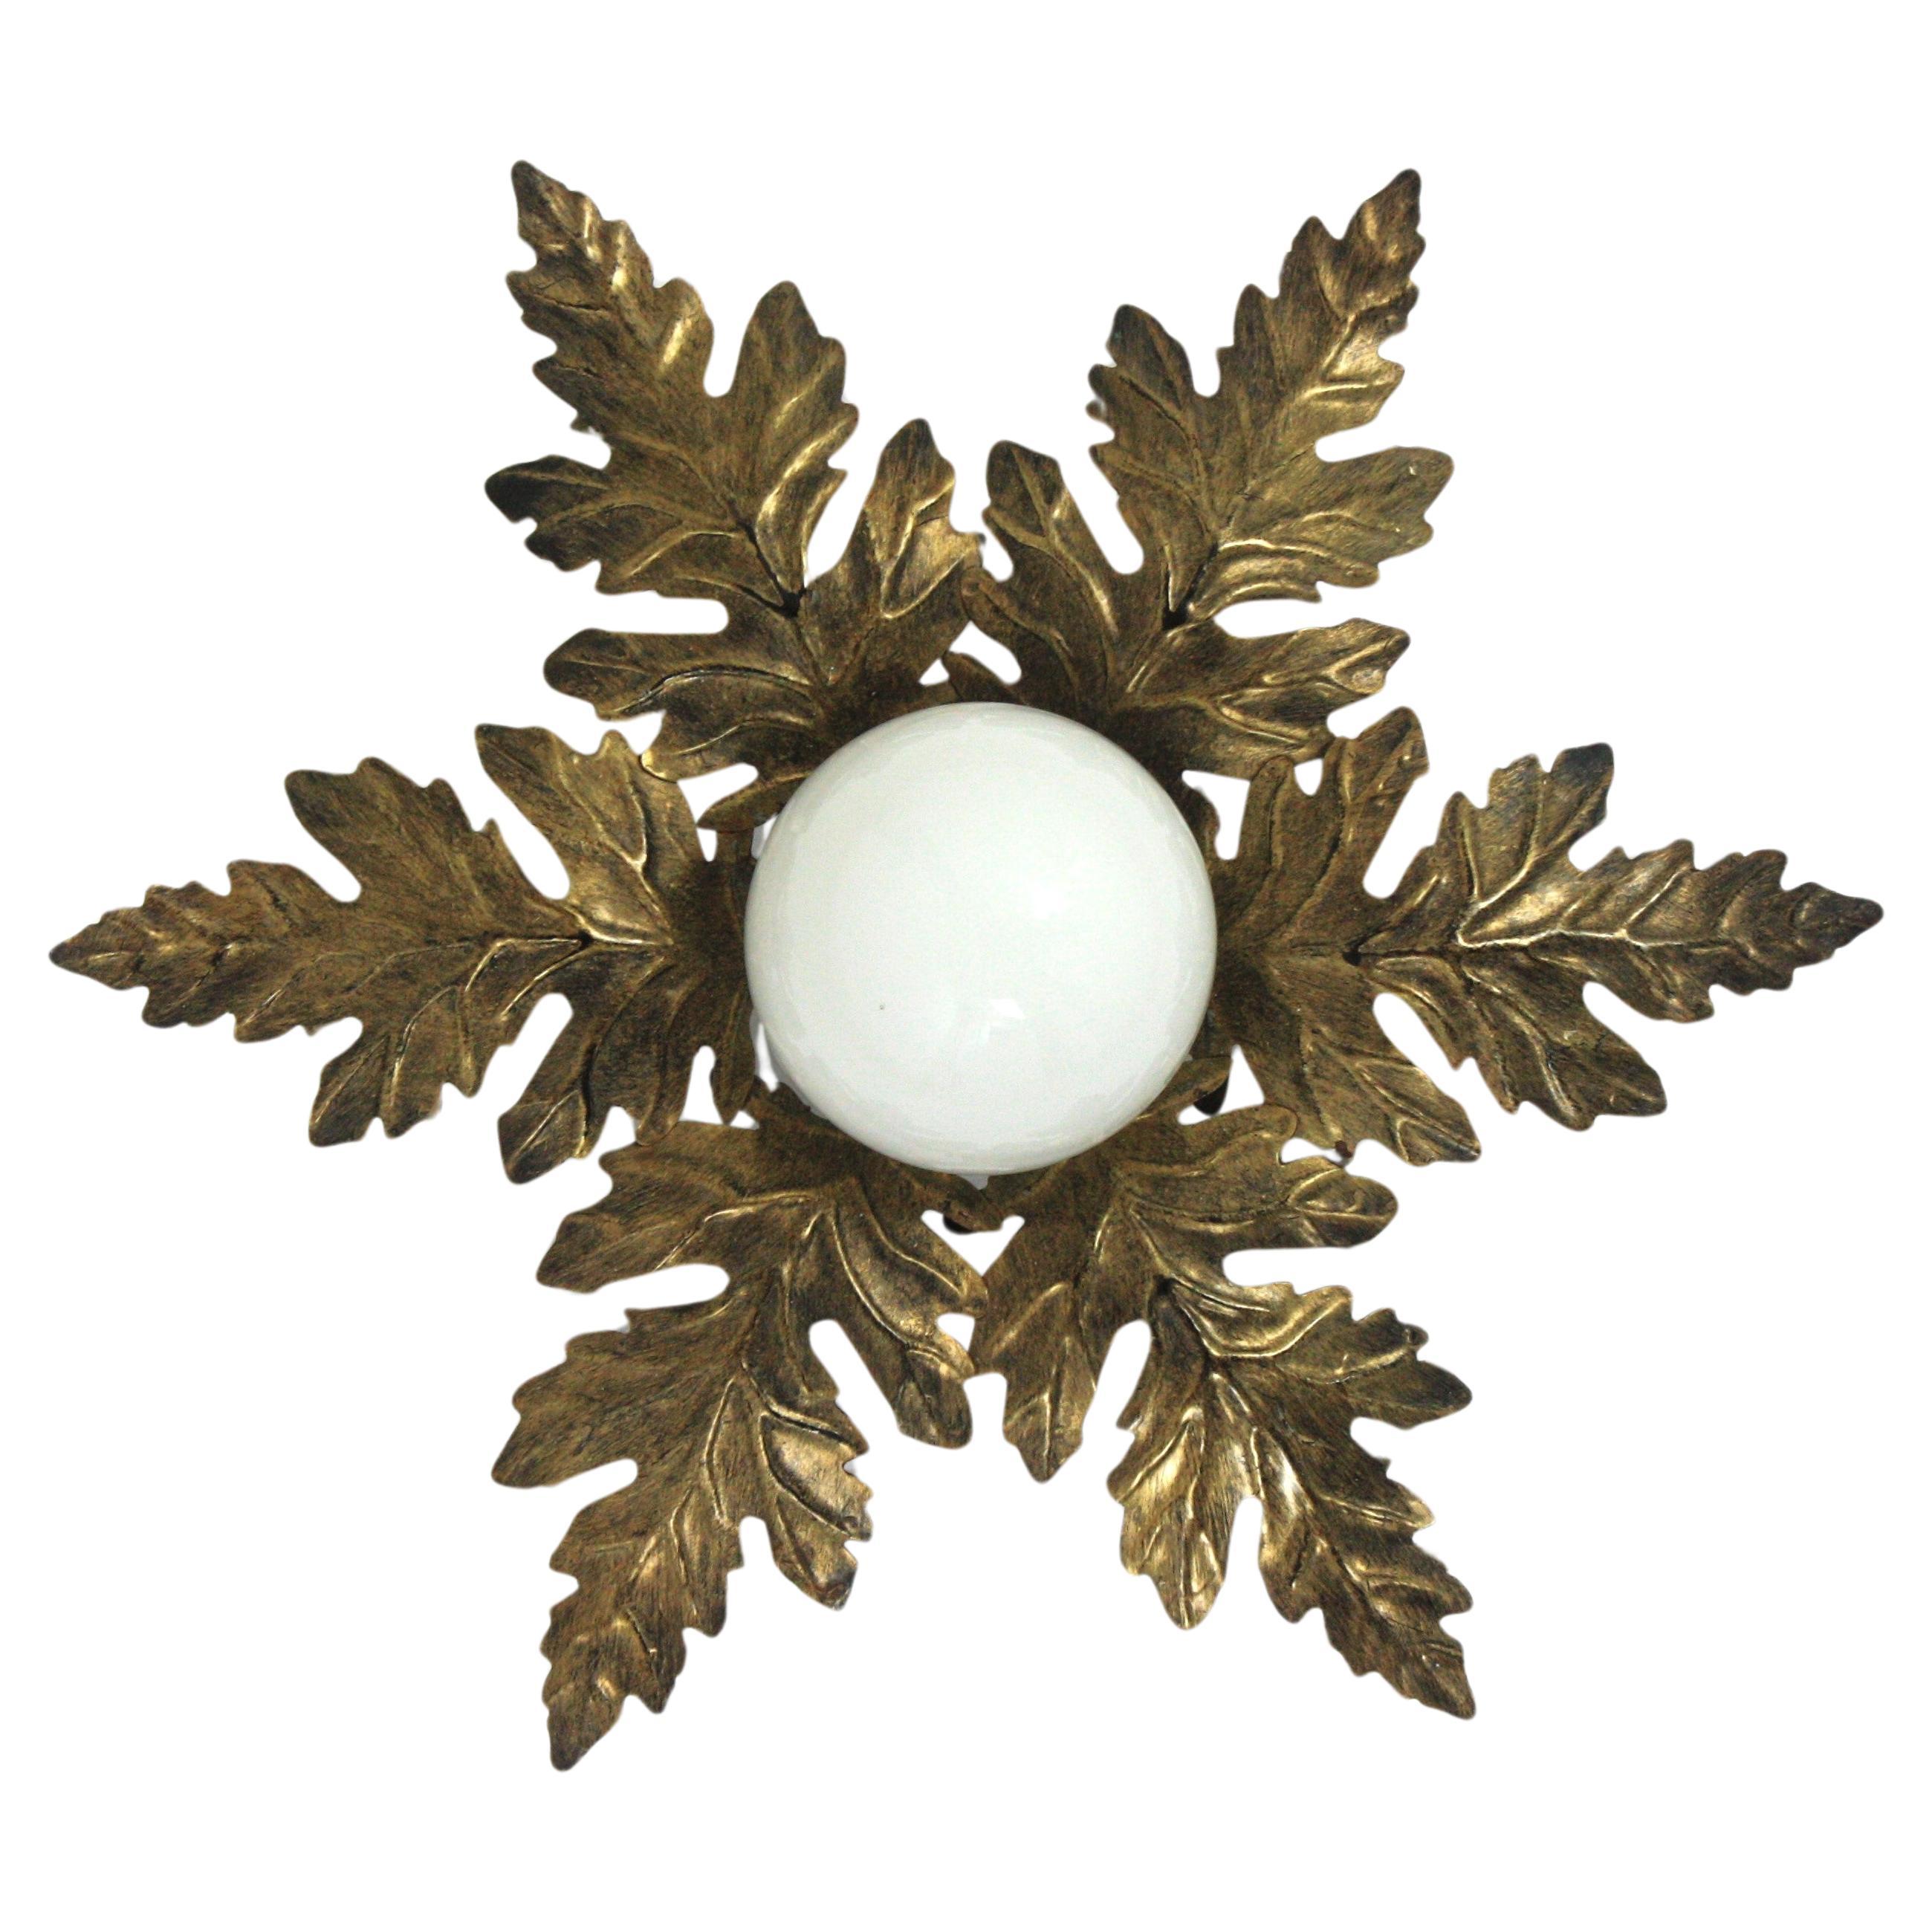 Beautiful gilt iron flush mount light fixture with glass globe shade and foliage frame. Manufactured by Ferro Art, Spain, 1960s.
This lovely ceiling light has a nice design with leaves surrounding a central opaline glass globe.
A cool ceiling lamp